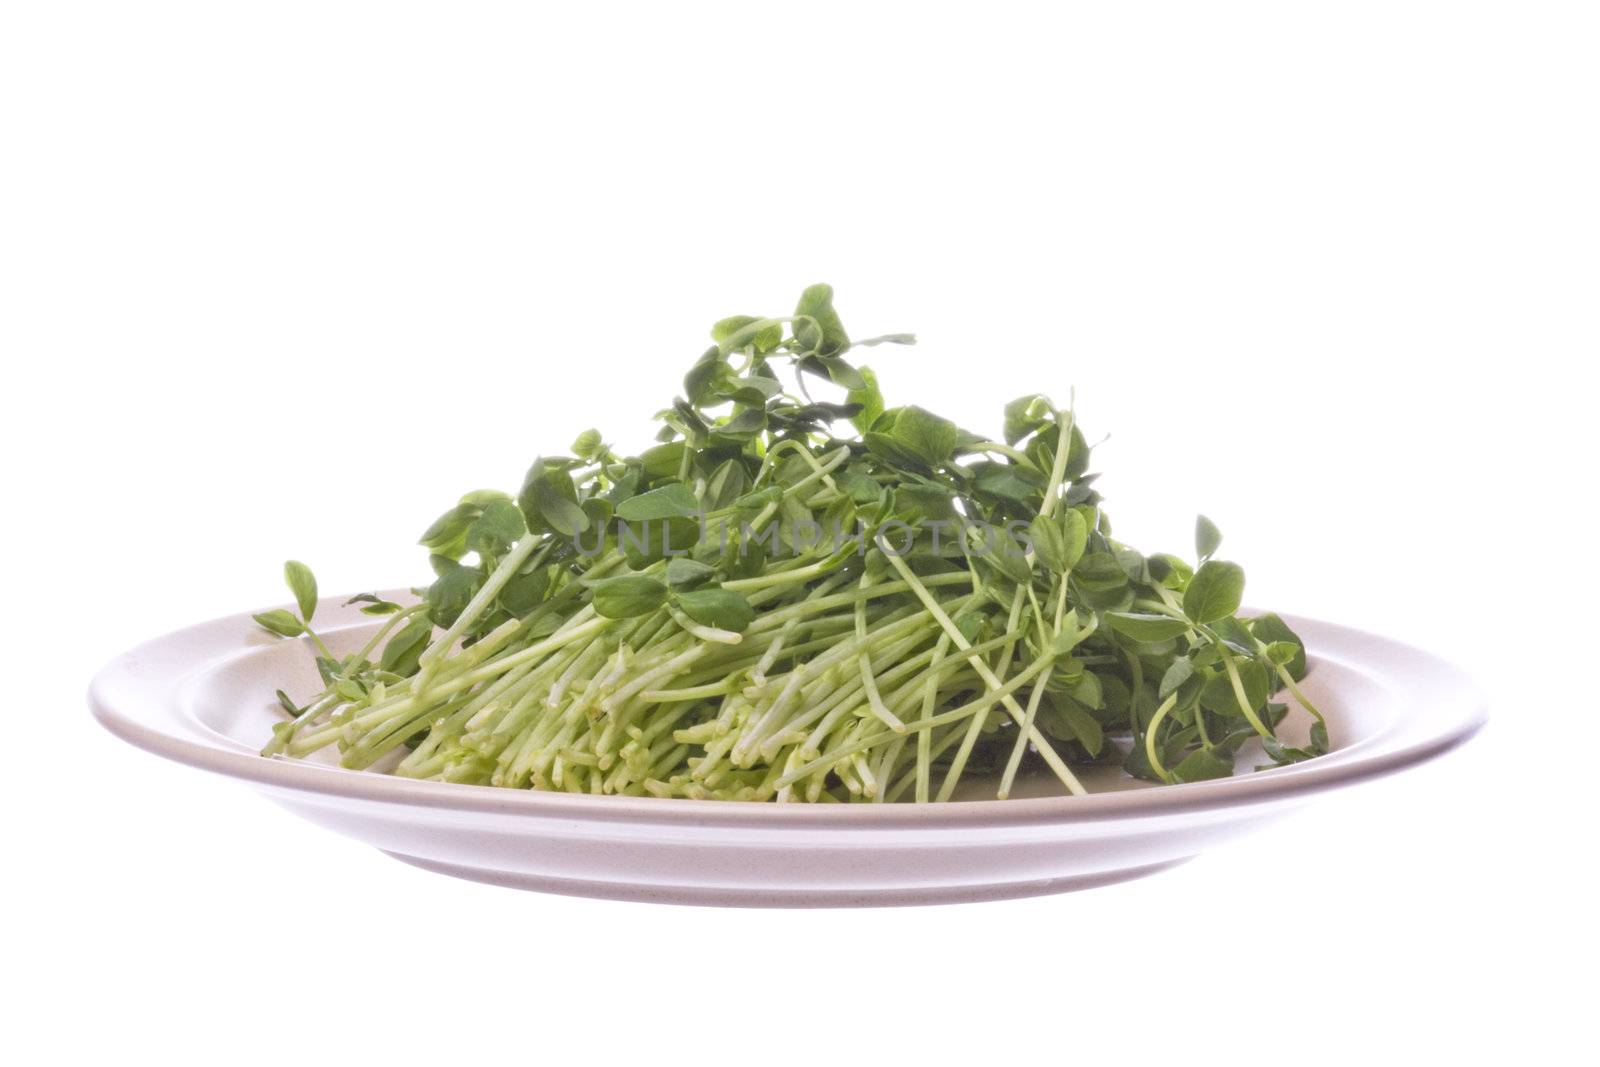 Snow Pea Sprouts on Plate Isolated by shariffc